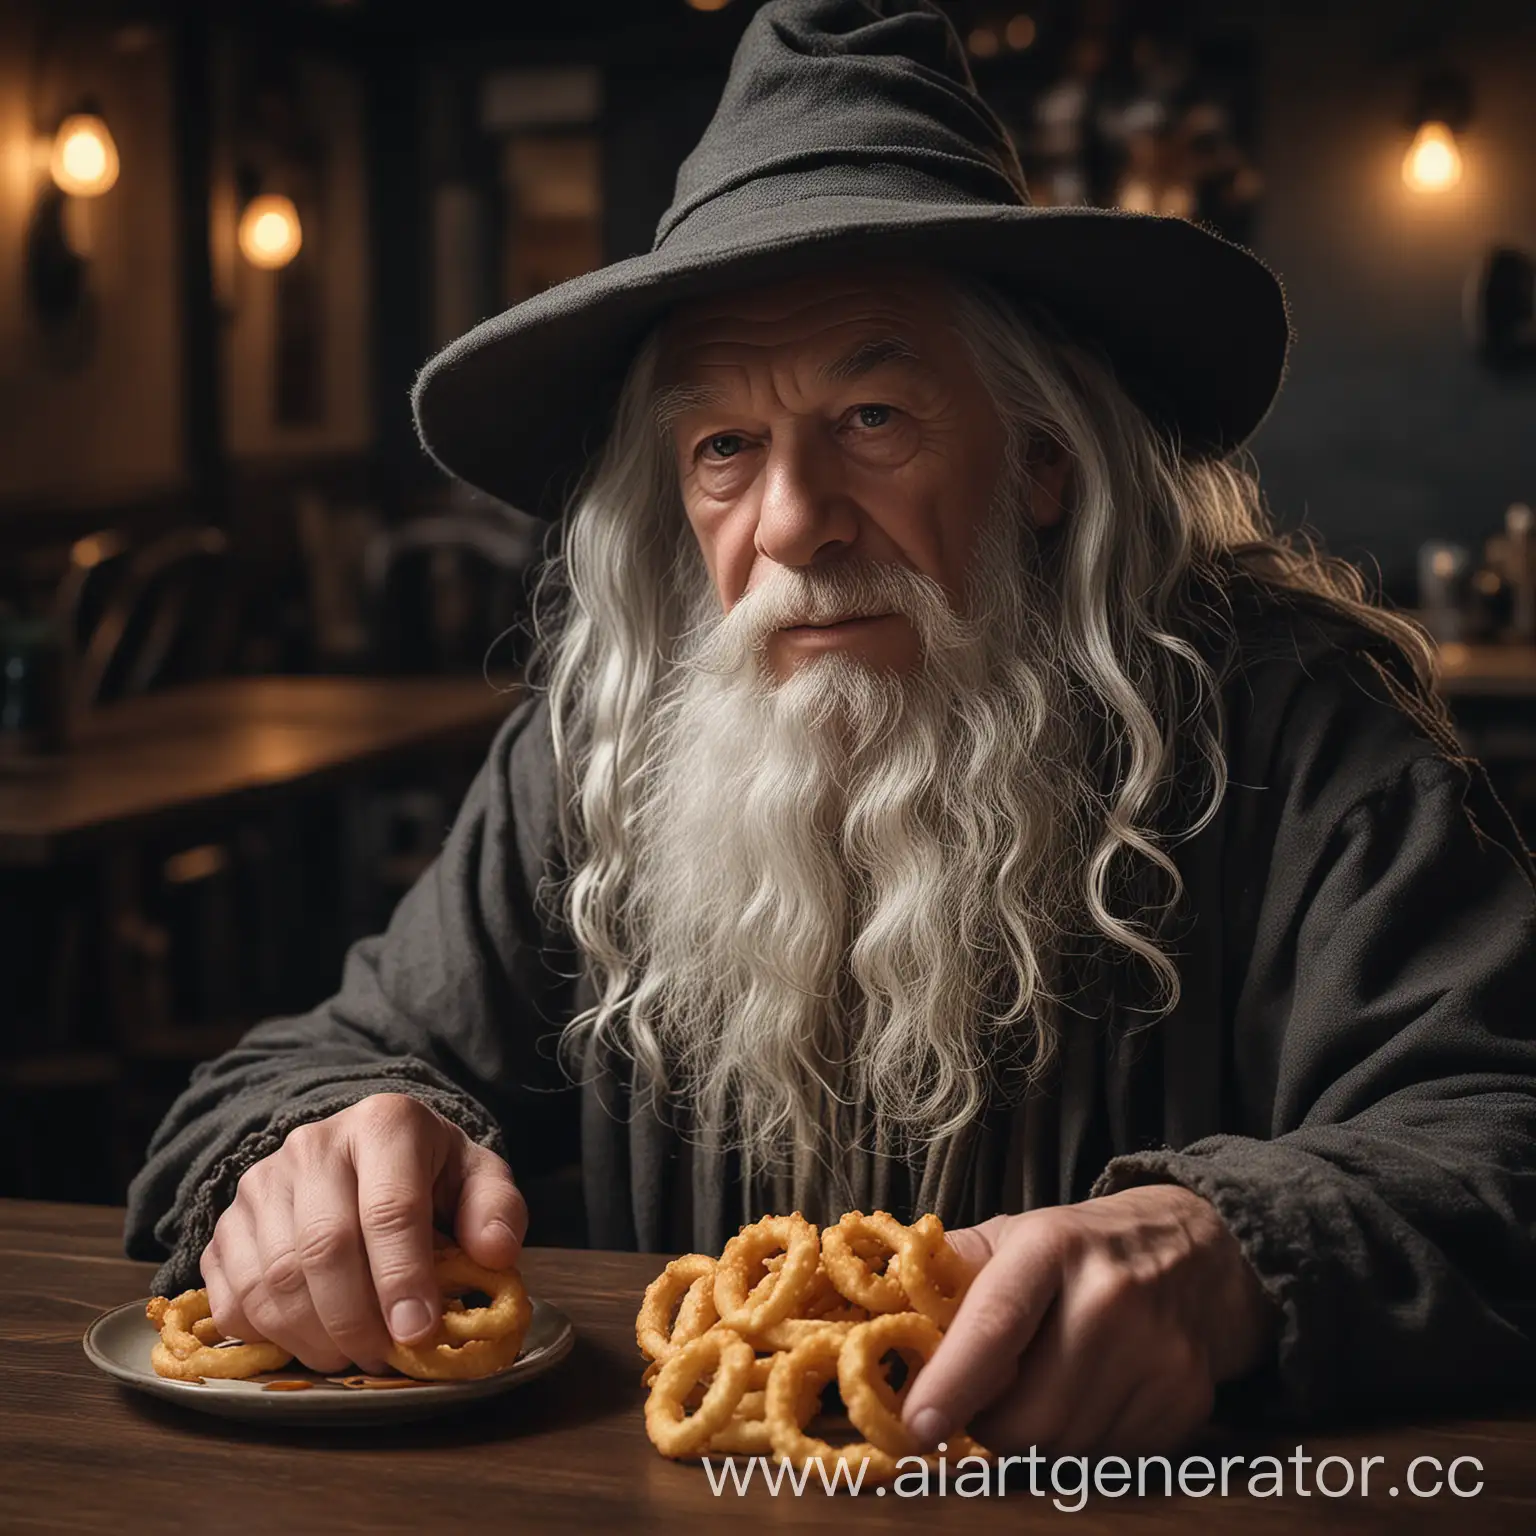 Gandalf-Enjoying-Onion-Rings-in-a-Rustic-Caf-Captivating-Scene-with-Rim-Lighting-and-Dark-Aesthetic